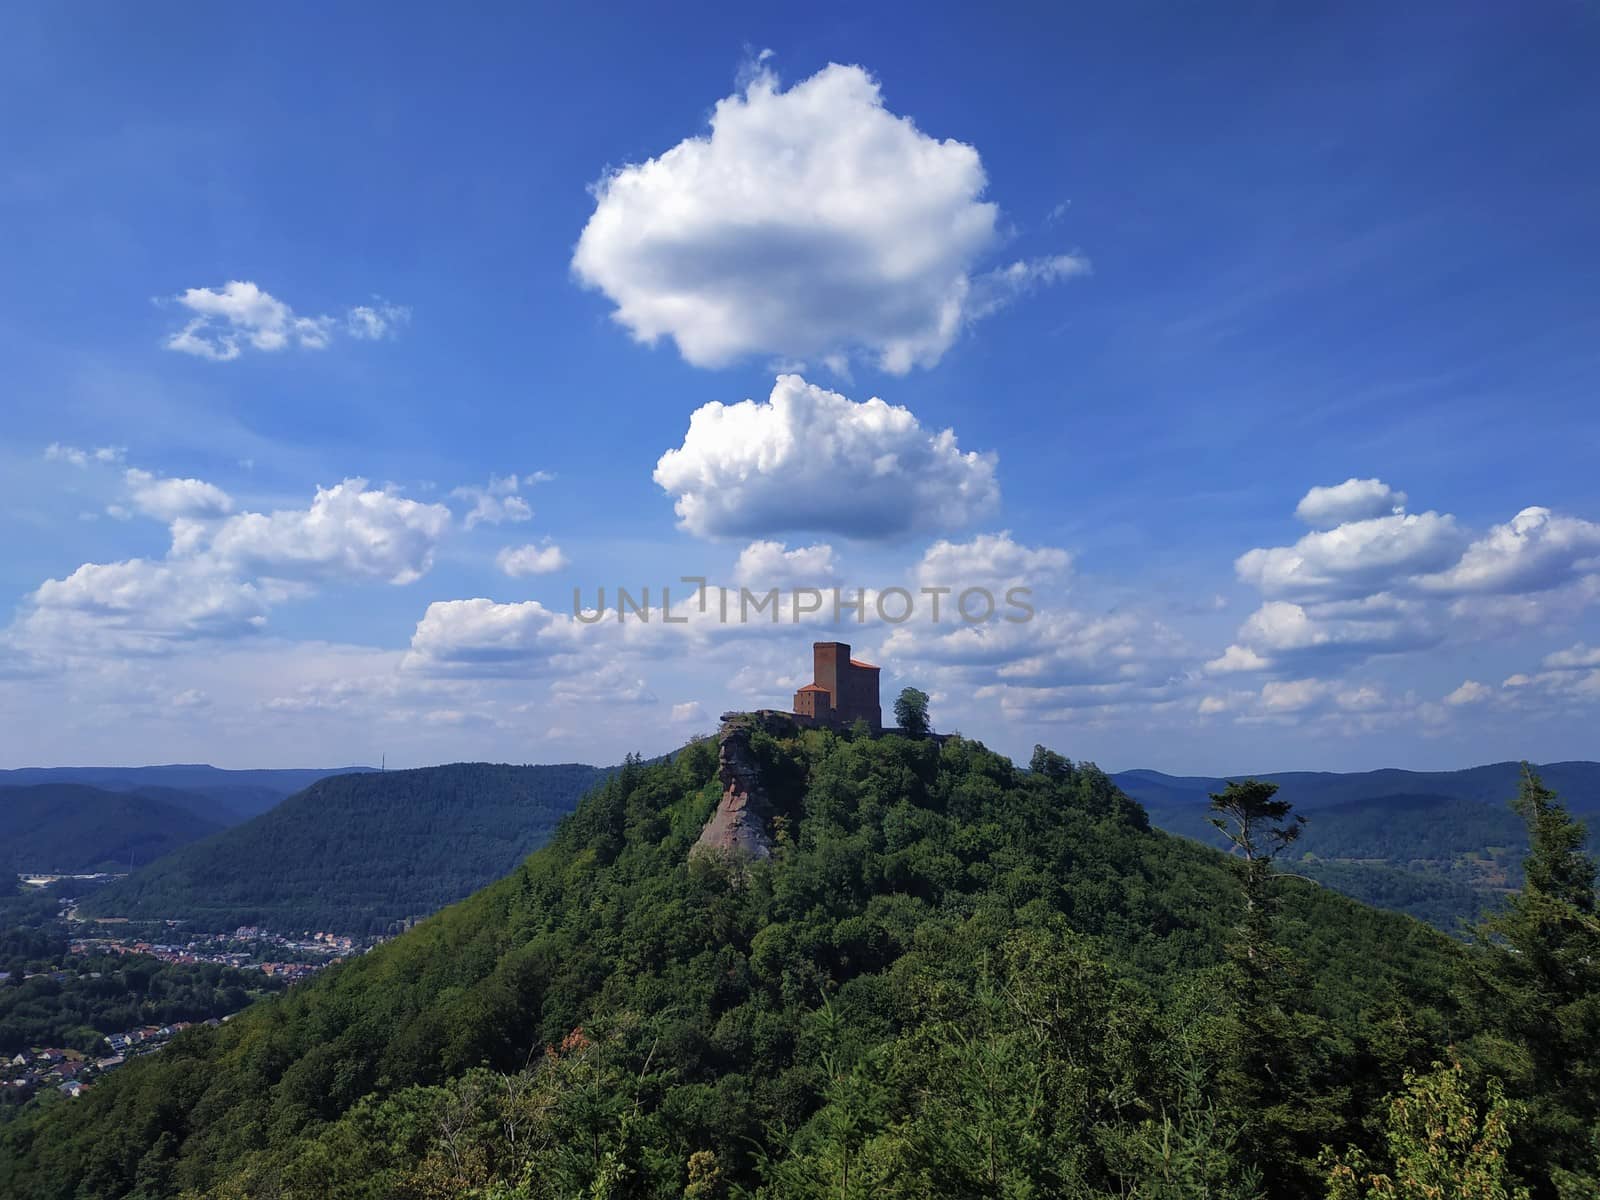 Interesting cloud formation over the Trifels castle located on a hill top